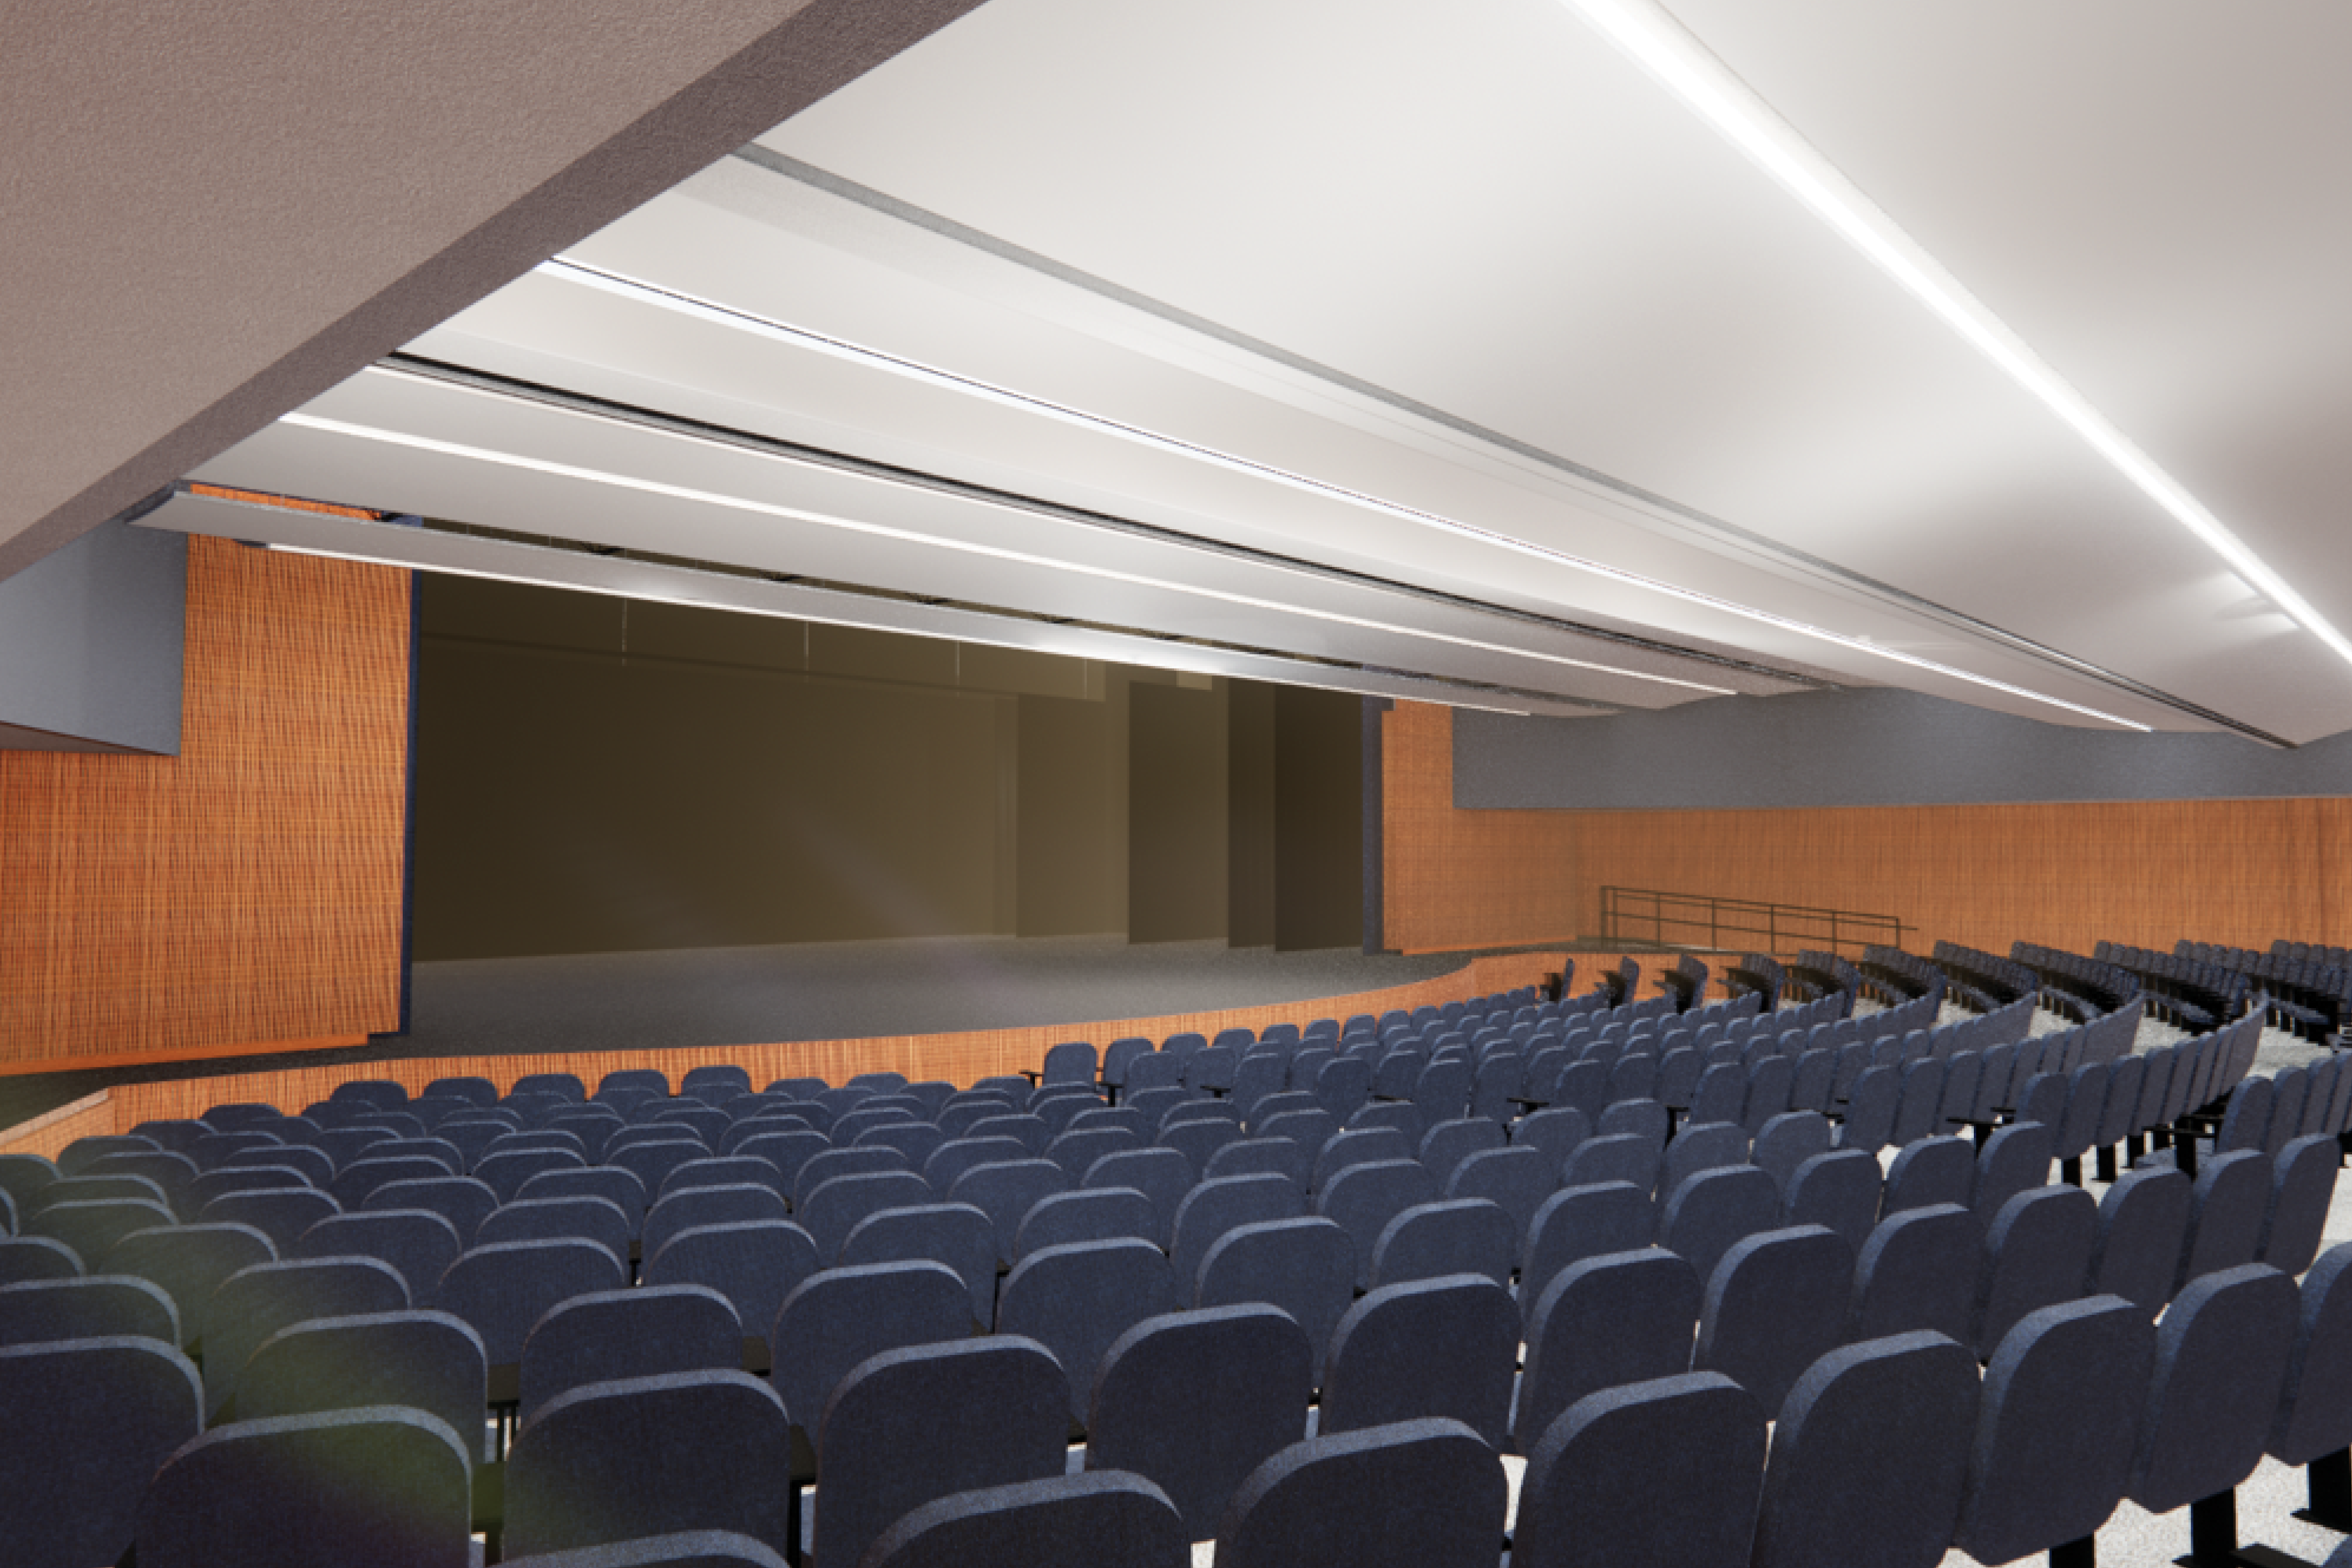 Camanche High School Auditorium designed by Bray Architects